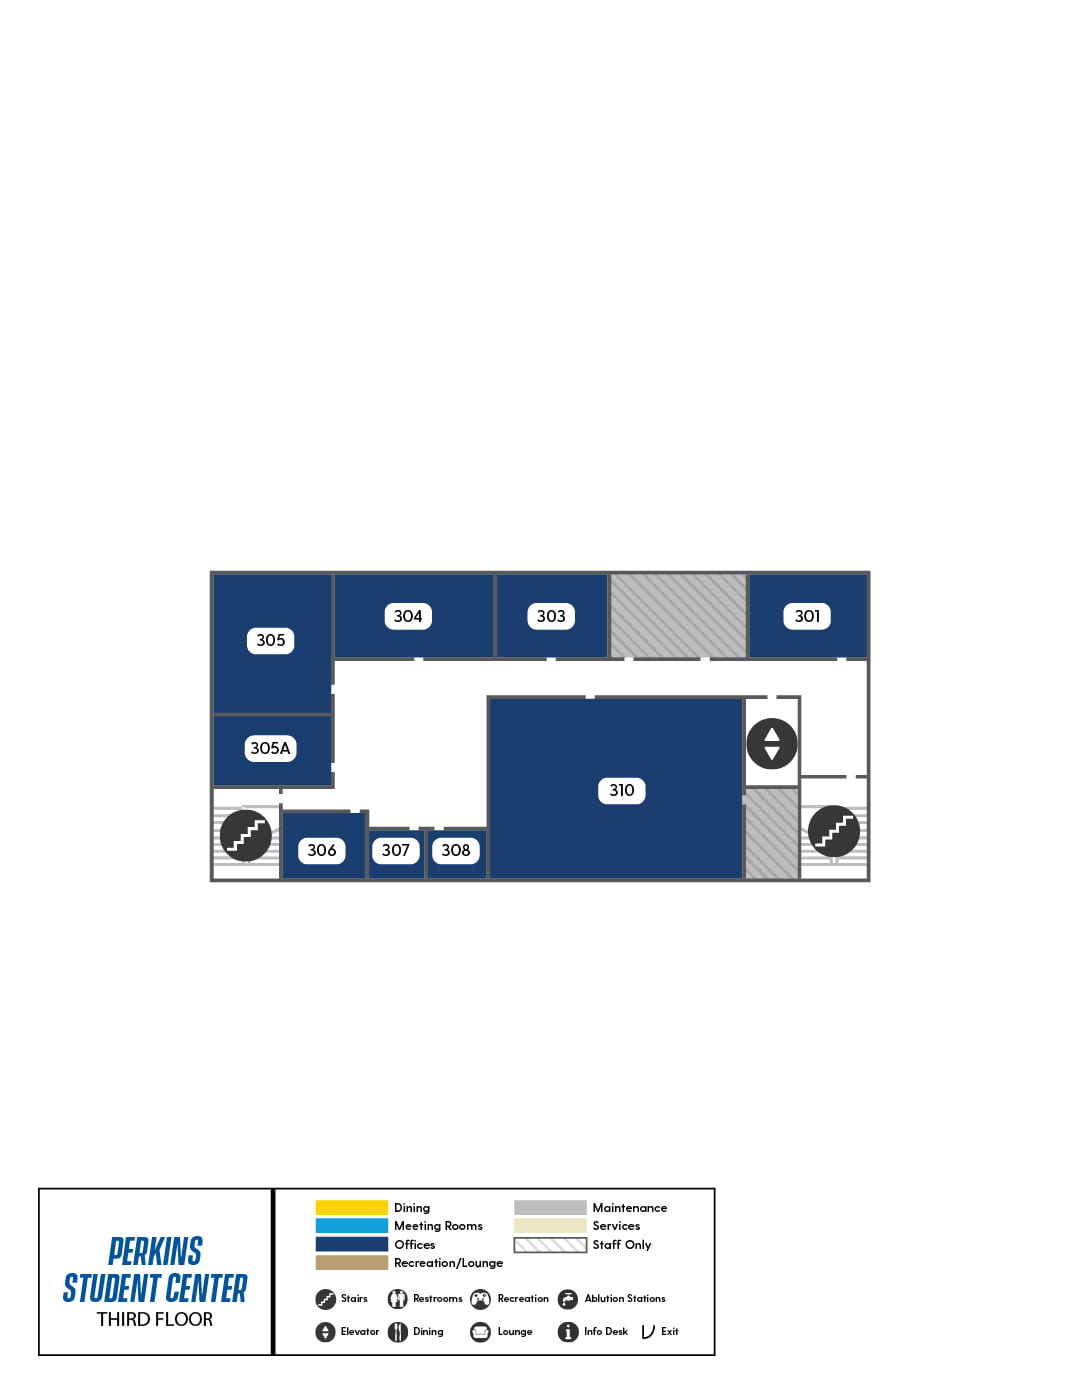 Perkins Third Floor map, showing multiple office spaces